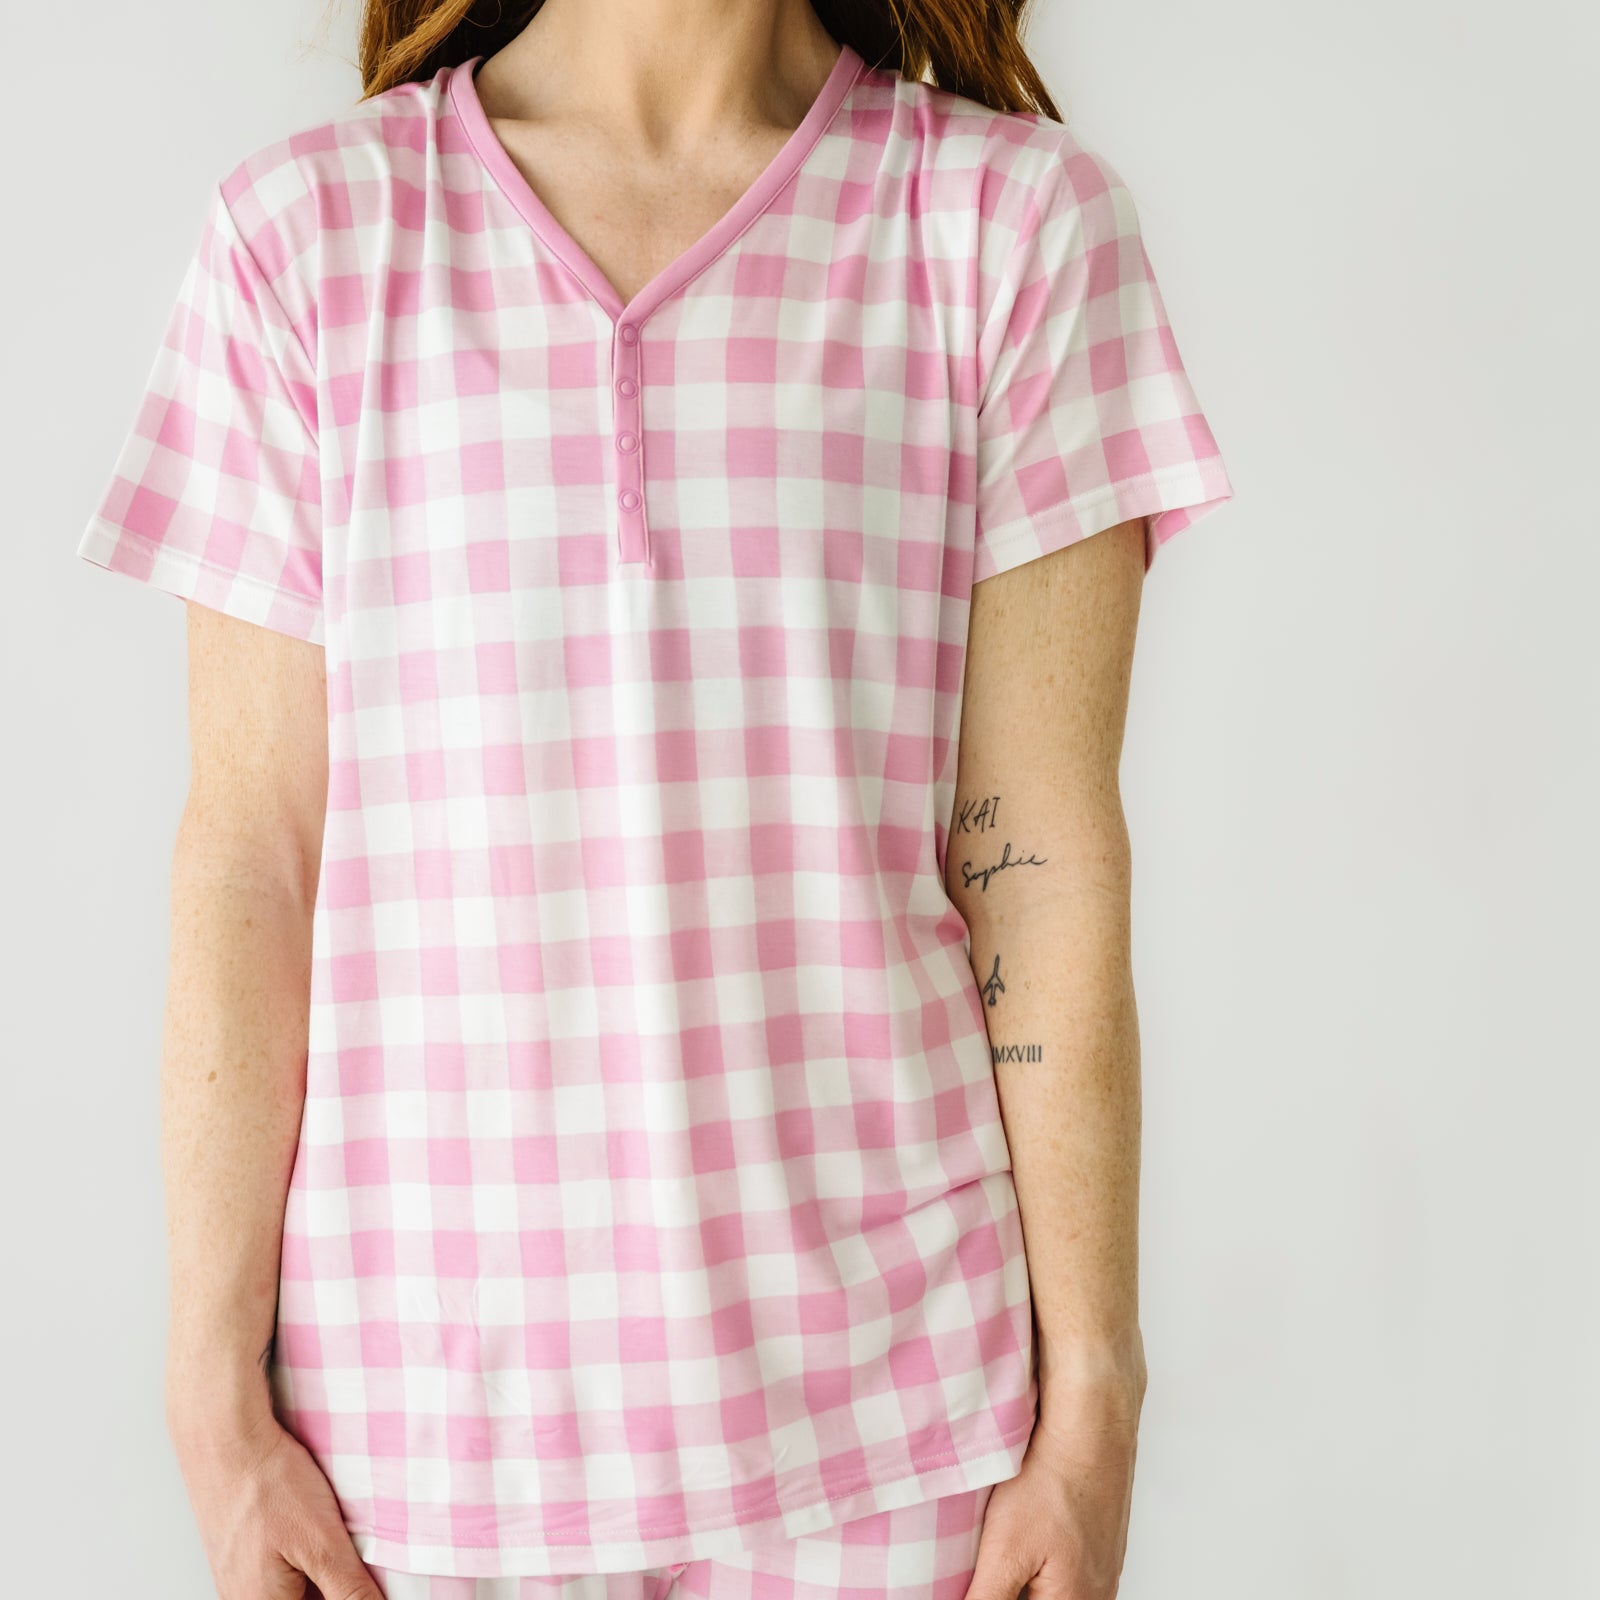 Close up image of a woman wearing a Pink Gingham women's pajama top